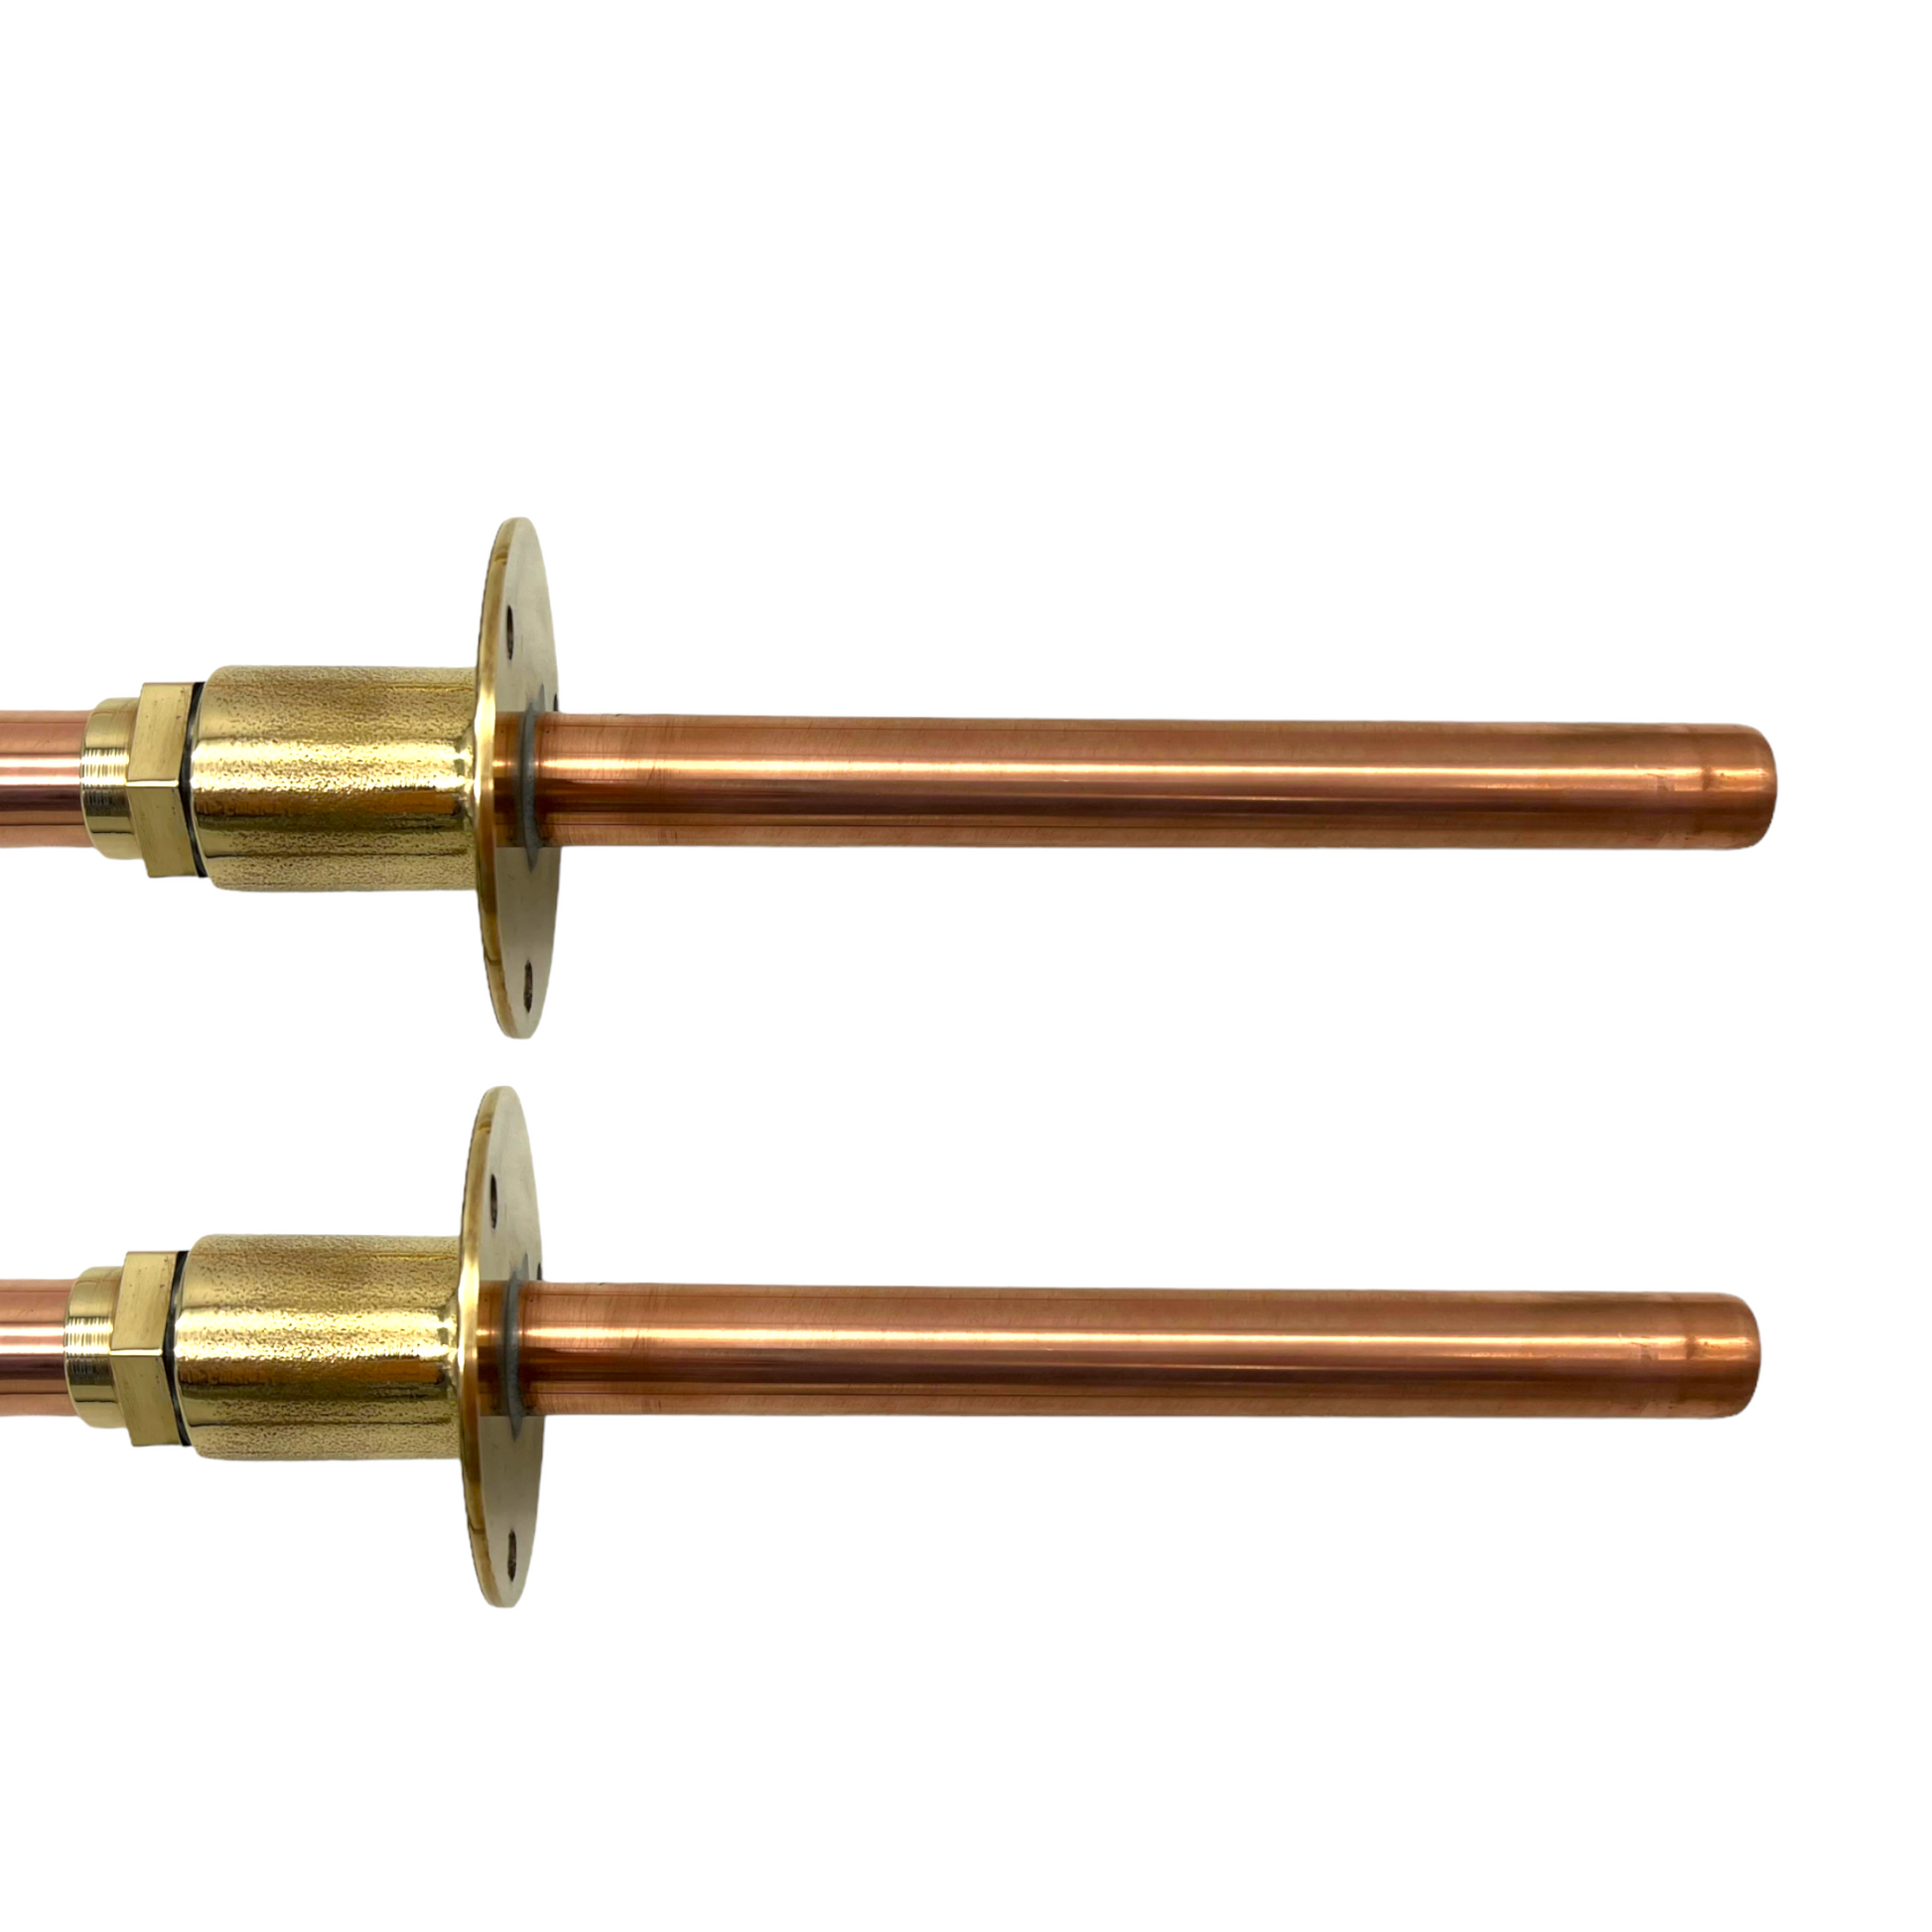 Copper and brass wall mounted taps with 15mm tail ends sold by All Things French Store